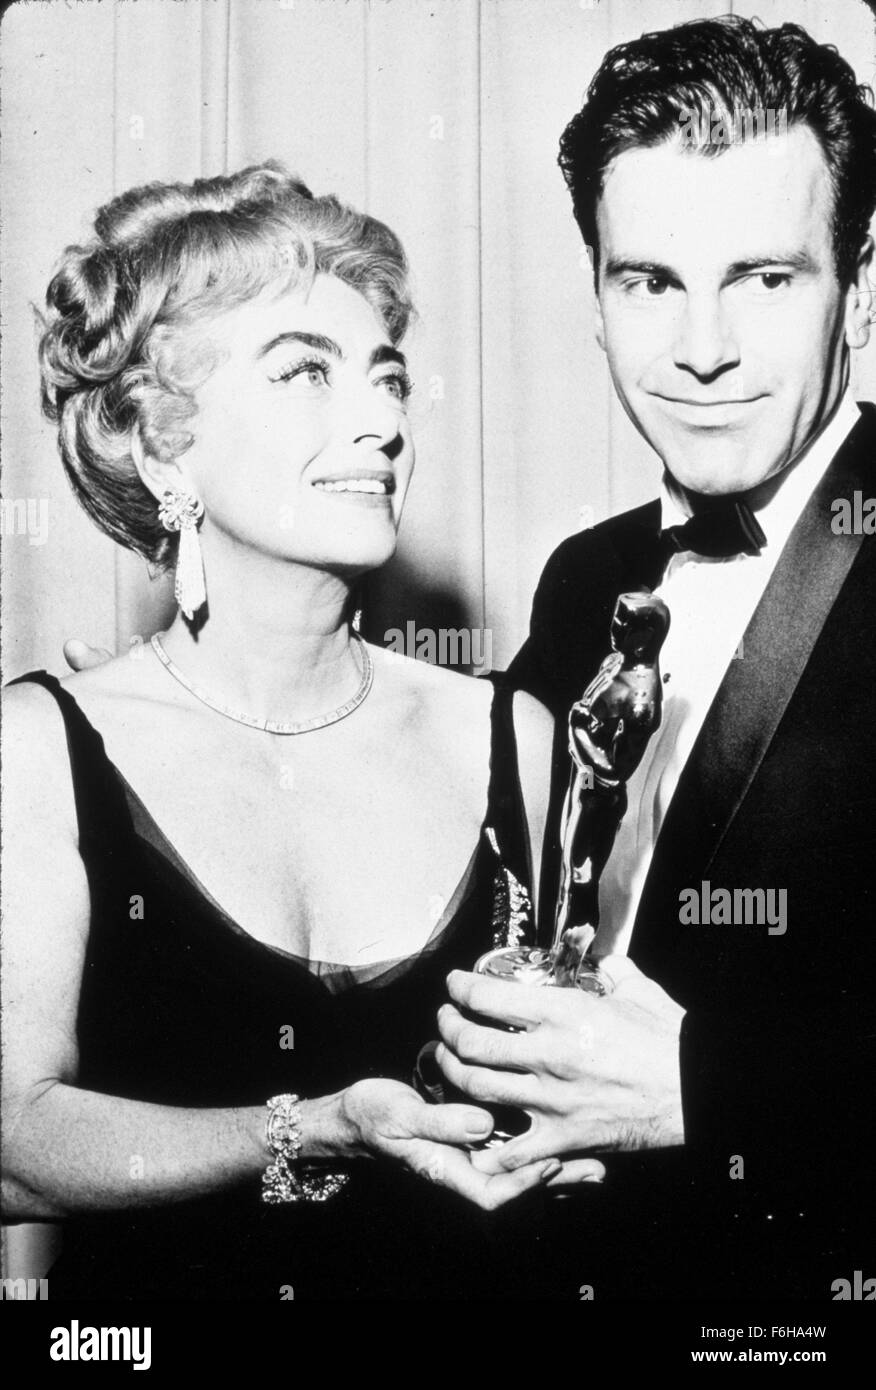 1961, Film Title: JUDGEMENT AT NUREMBERG, Director: STANLEY KRAMER, Pictured: 1961, ACADEMY AWARDS CEREMONIES, ACCESSORIES, AWARDS - ACADEMY, BEST ACTOR, JOAN CRAWFORD, STANLEY KRAMER, OSCAR (ACADEMY AWARD STATUE), SANTA MONICA CIVIC AUDITORIUM, MAXIMILIAN SCHELL, HOLDING AWARD, OSCAR RETRO. (Credit Image: SNAP) (Credit Image: c SNAP/Entertainment Pictures) Stock Photo